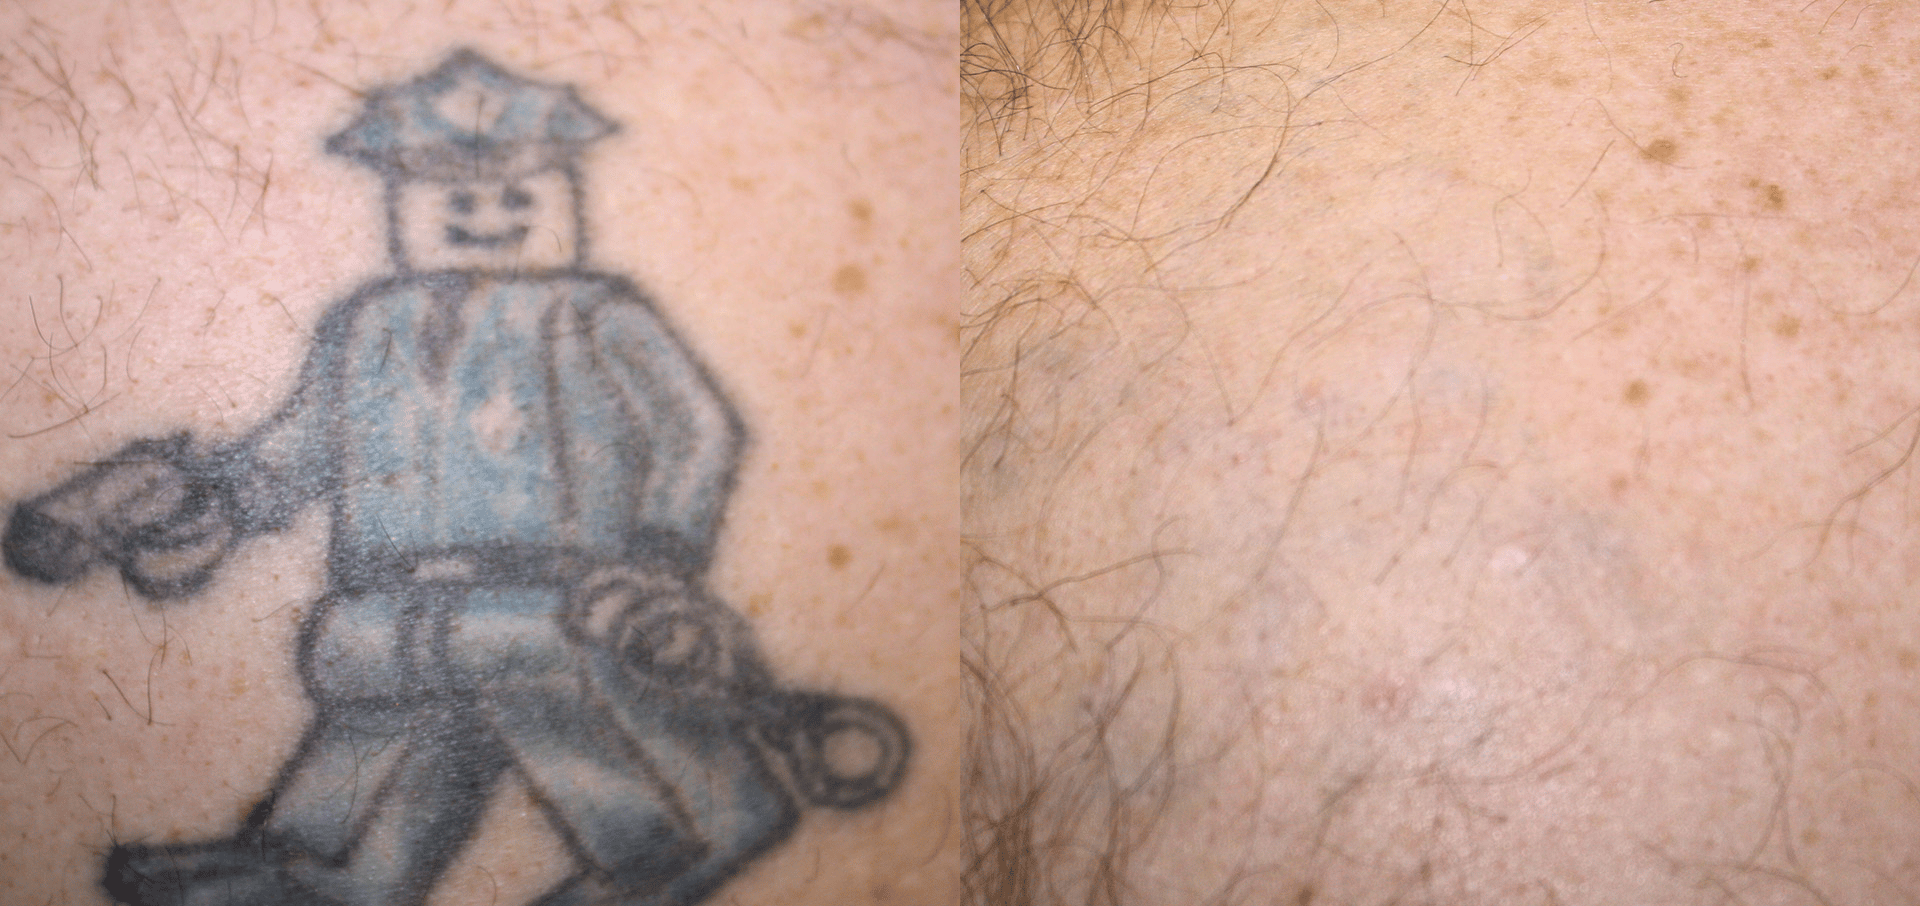 laser tattoo removal before and after 4